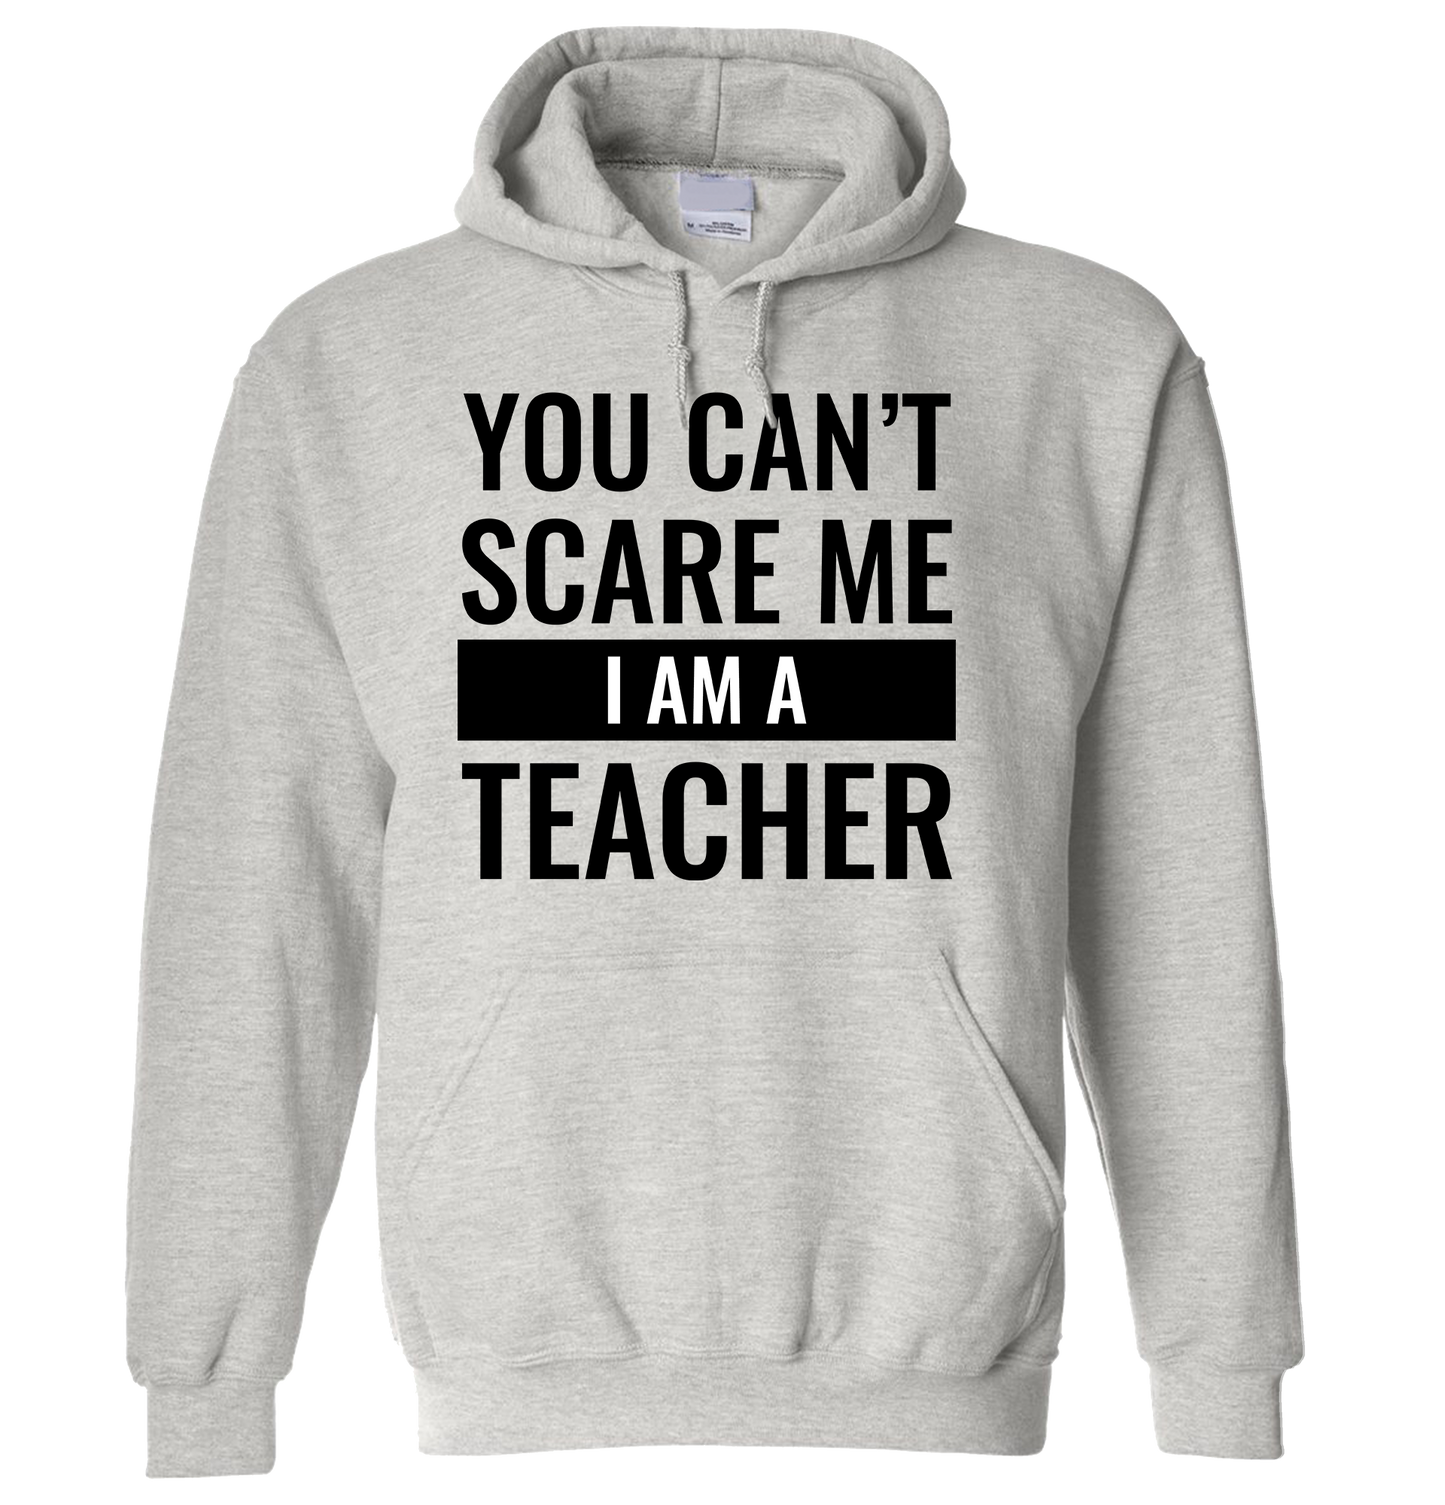 Hoodie - Can't Scare Me - Profession